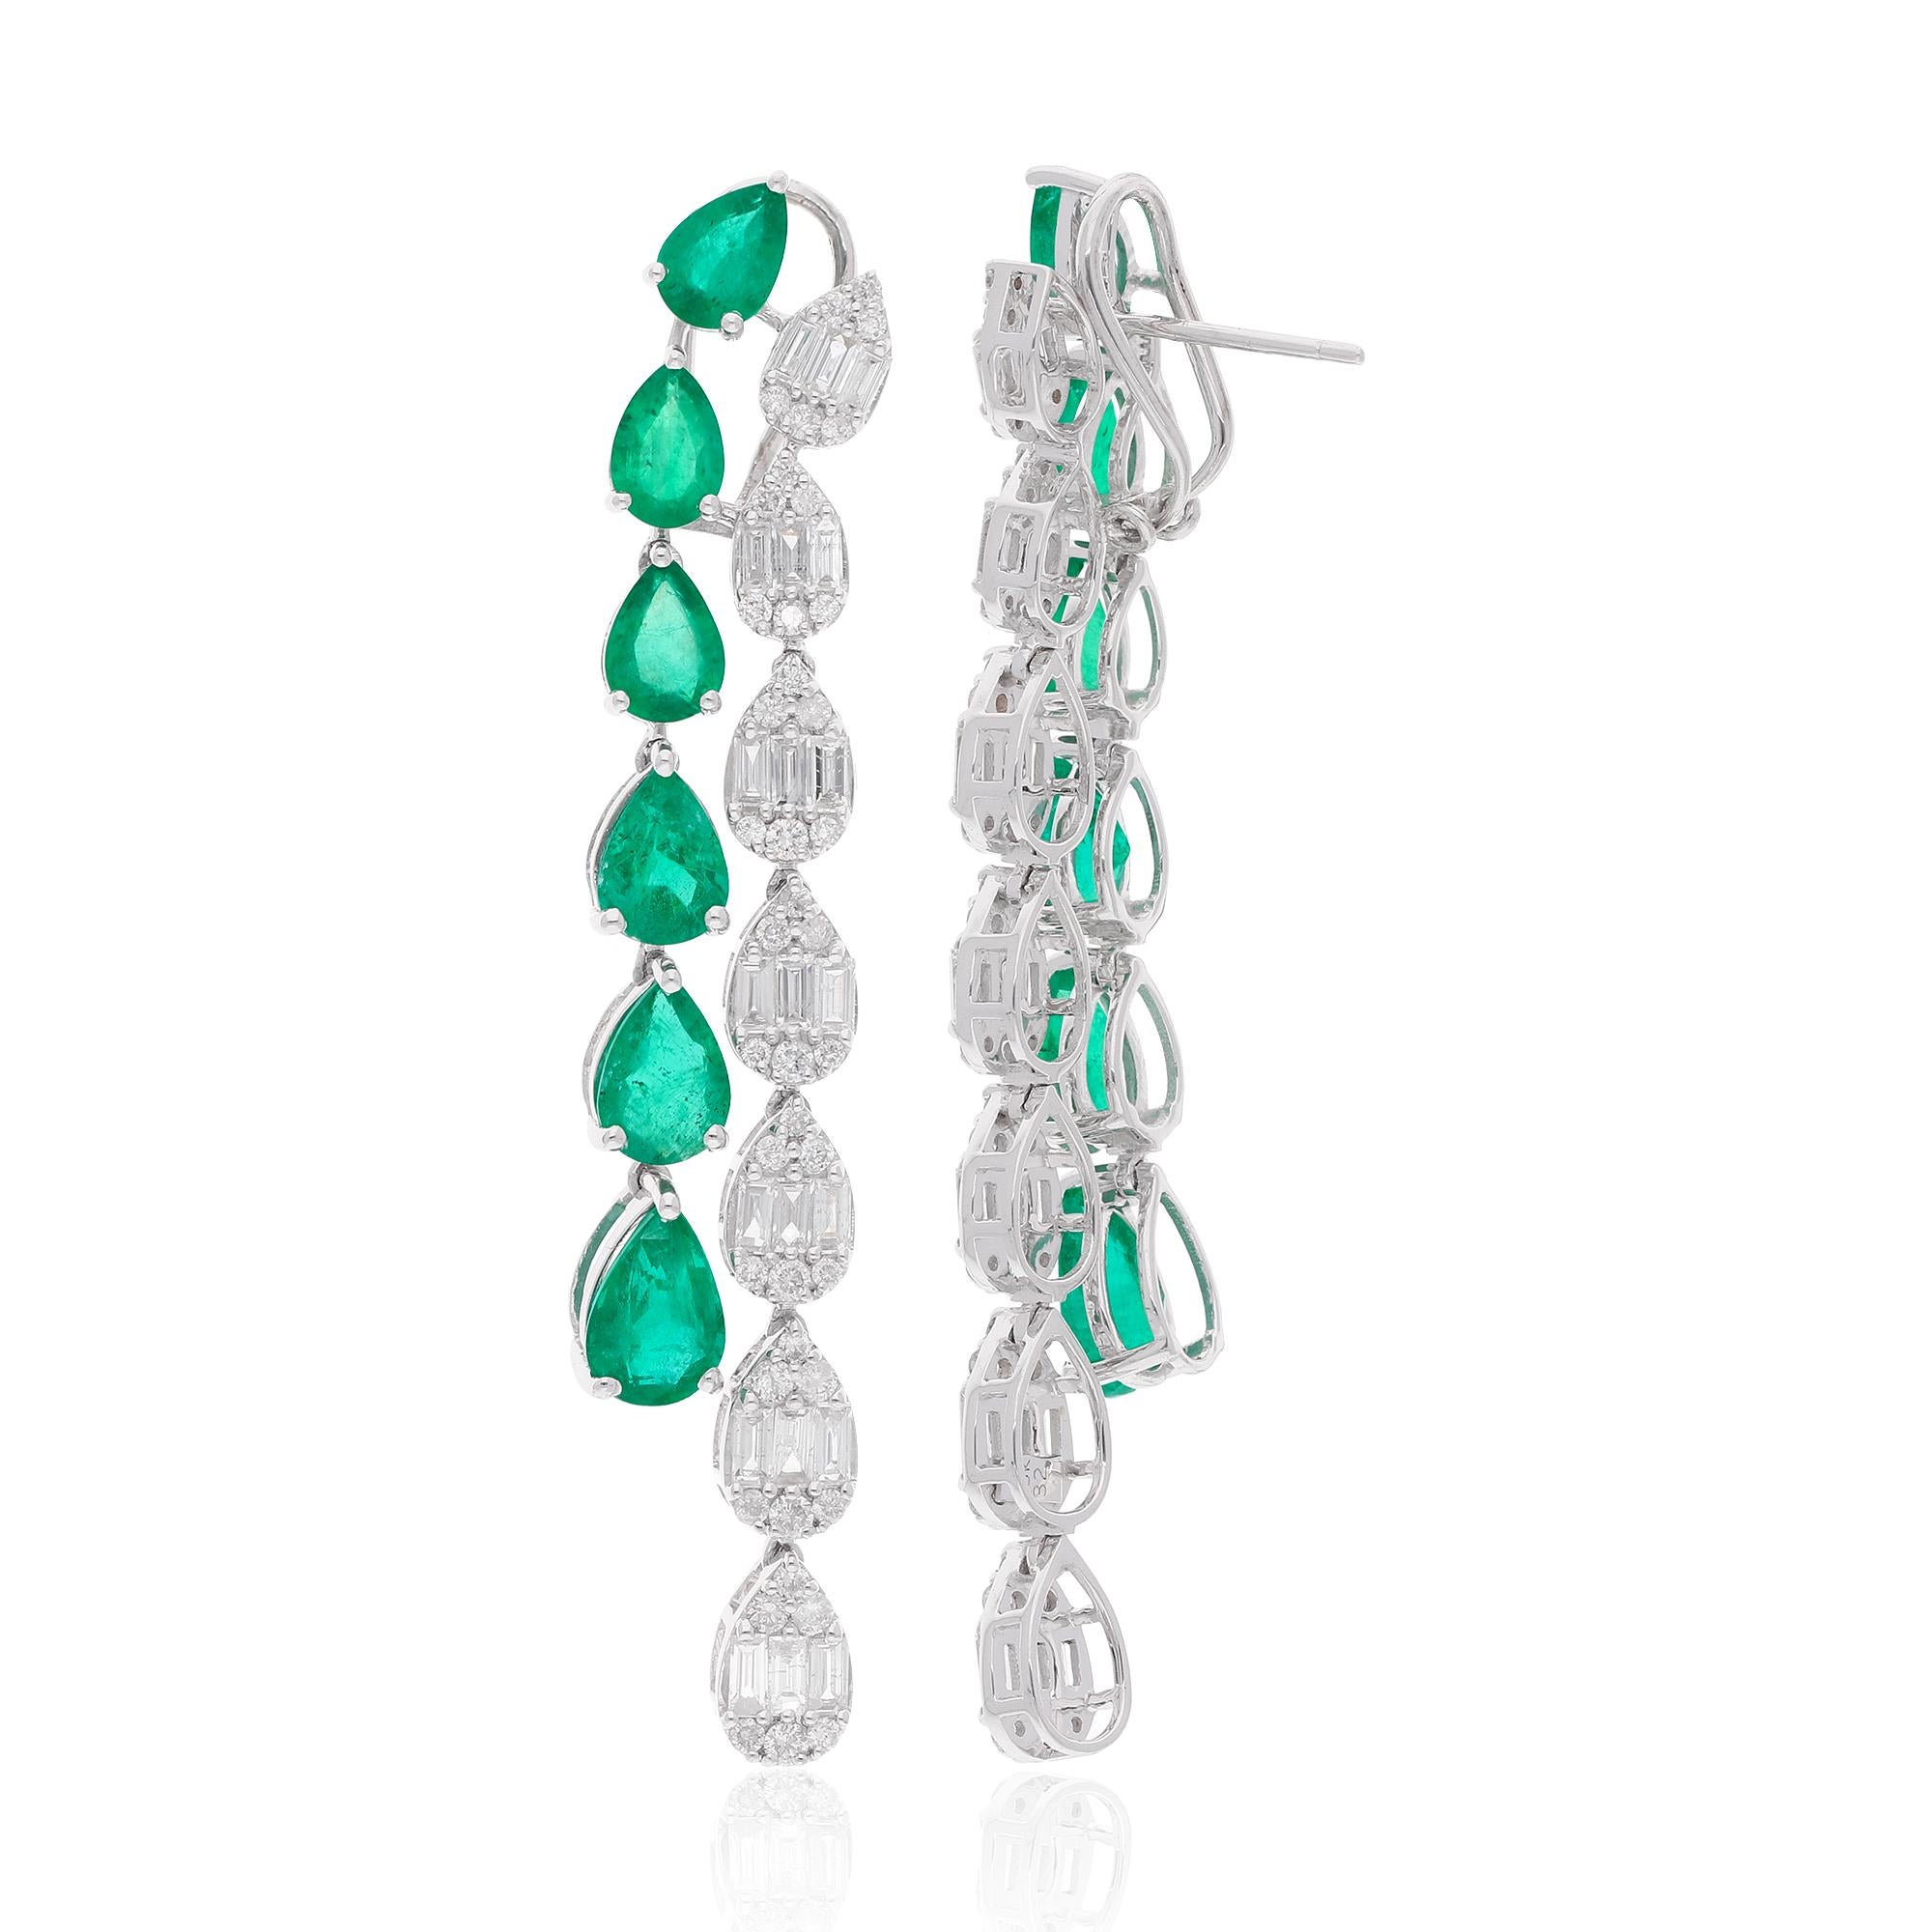 Item Code :- SEE-12599
Gross Wt. :- 17.25 gm
18k White Gold Wt. :- 14.64 gm
Natural Diamond Wt. :- 3.40 Ct. ( AVERAGE DIAMOND CLARITY SI1-SI2 & COLOR H-I )
Emerald Weight :- 9.66 Ct.
Earrings Length :- 63 mm approx.

✦